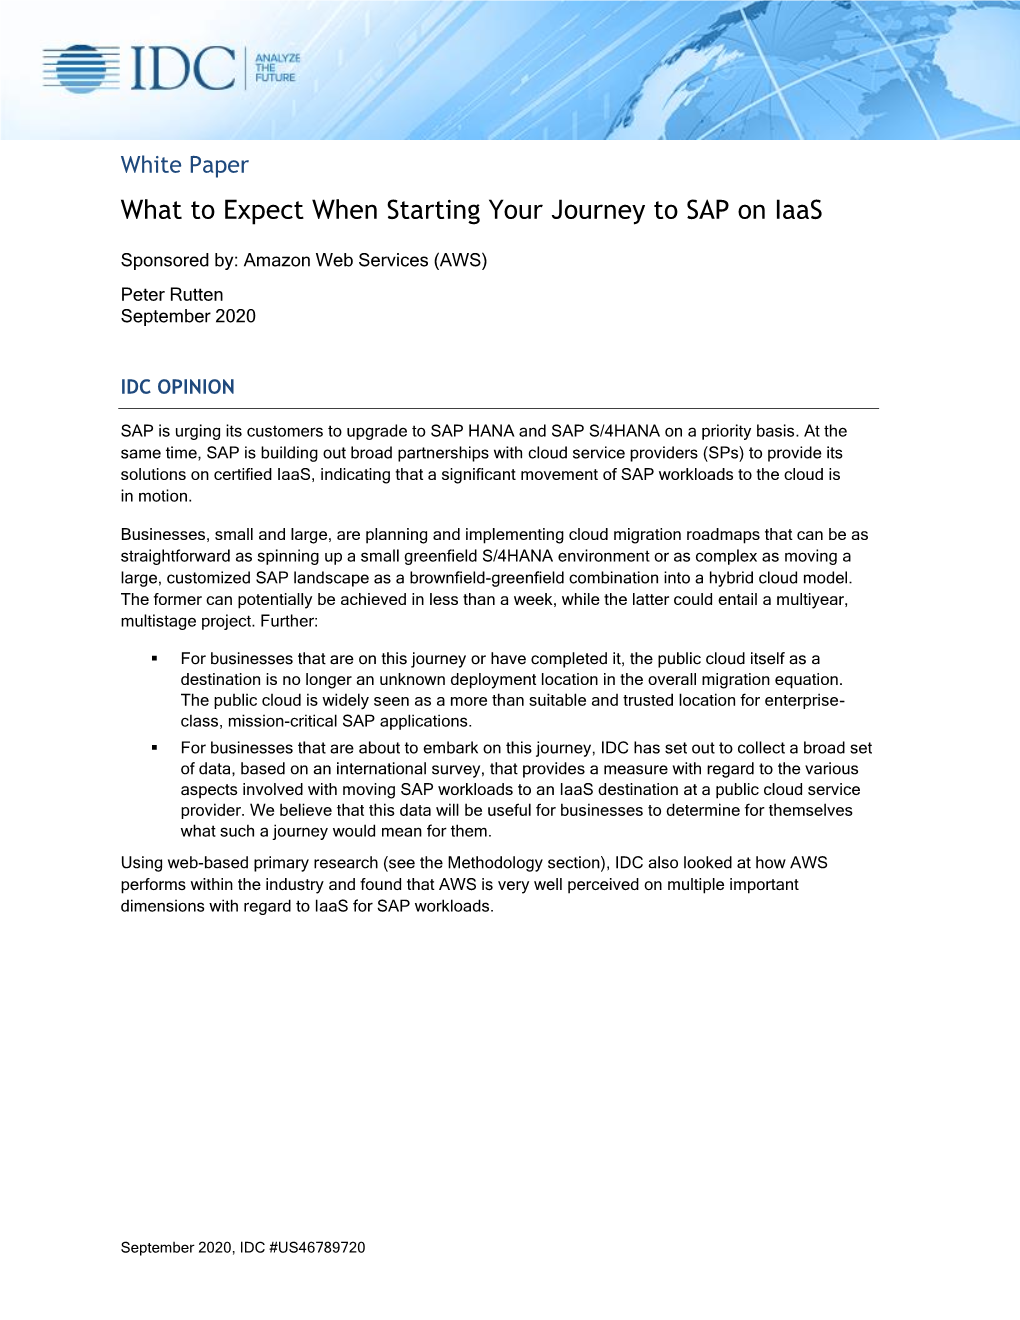 What to Expect When Starting Your Journey to SAP on Iaas